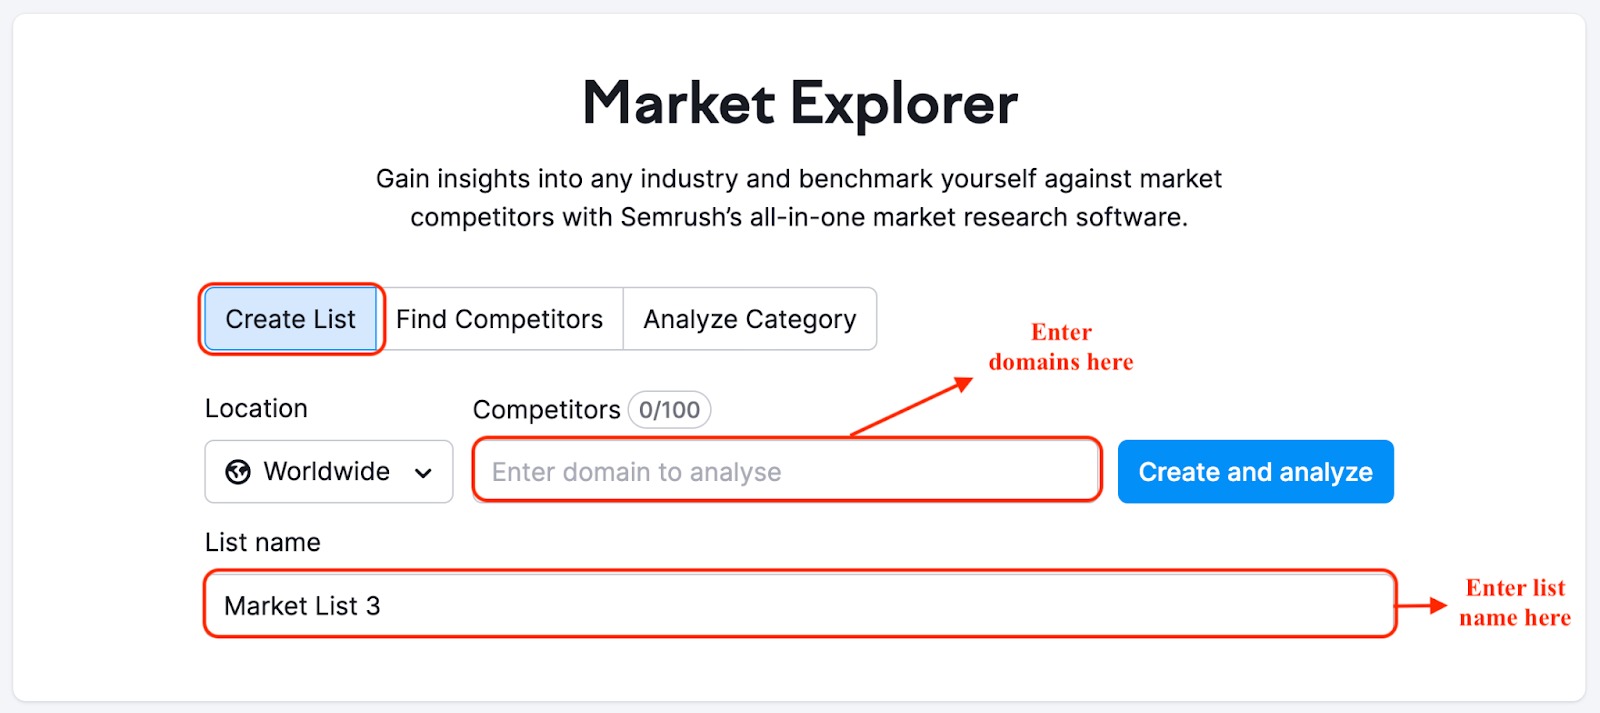 A screenshot of the "Market Explorer" landing page with highlighted "Create List", "Enter domain", and "List name" buttons